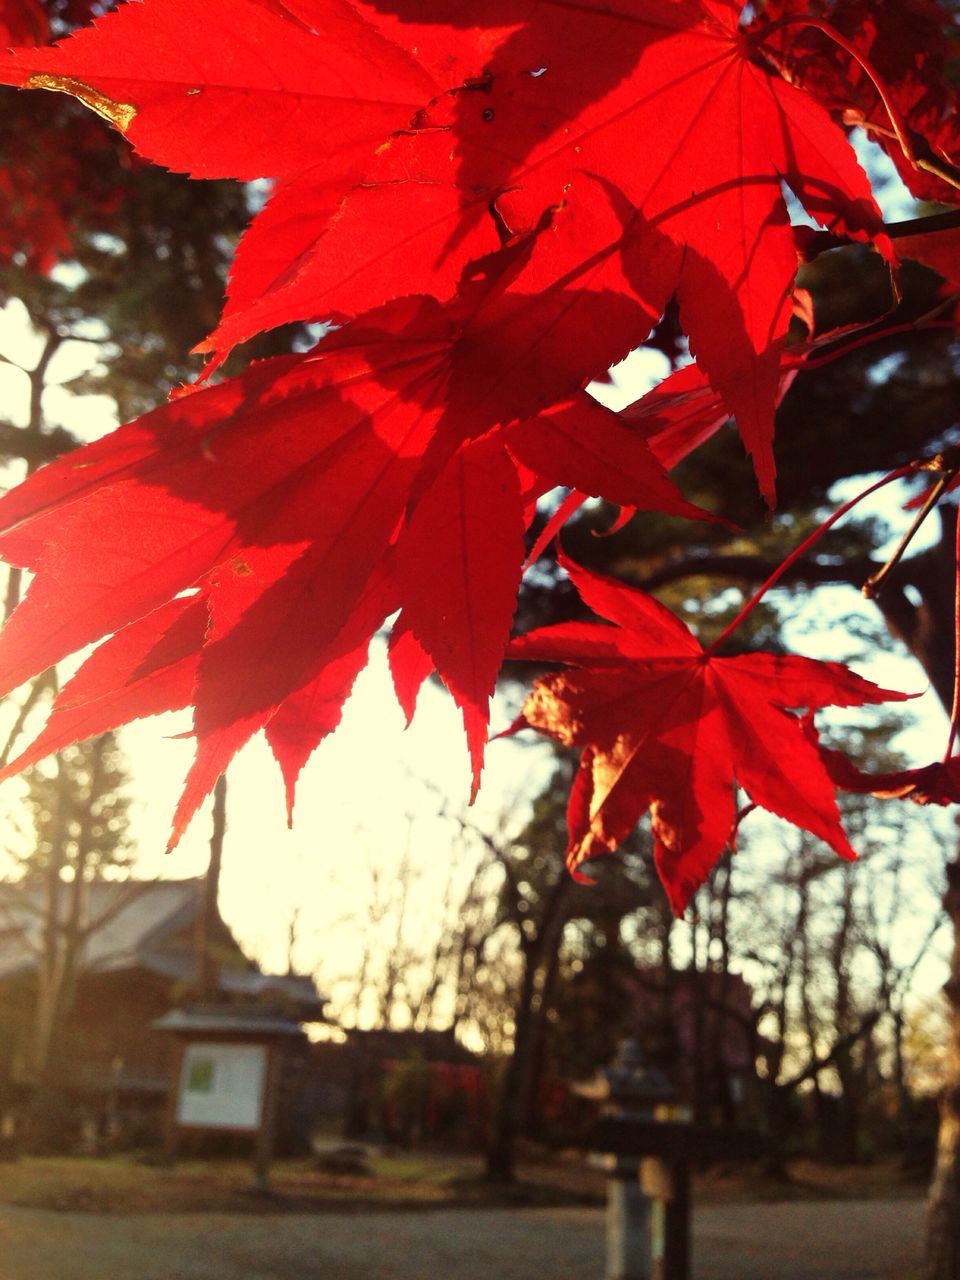 red, autumn, tree, leaf, change, maple leaf, beauty in nature, nature, maple tree, no people, maple, close-up, fragility, outdoors, day, built structure, growth, branch